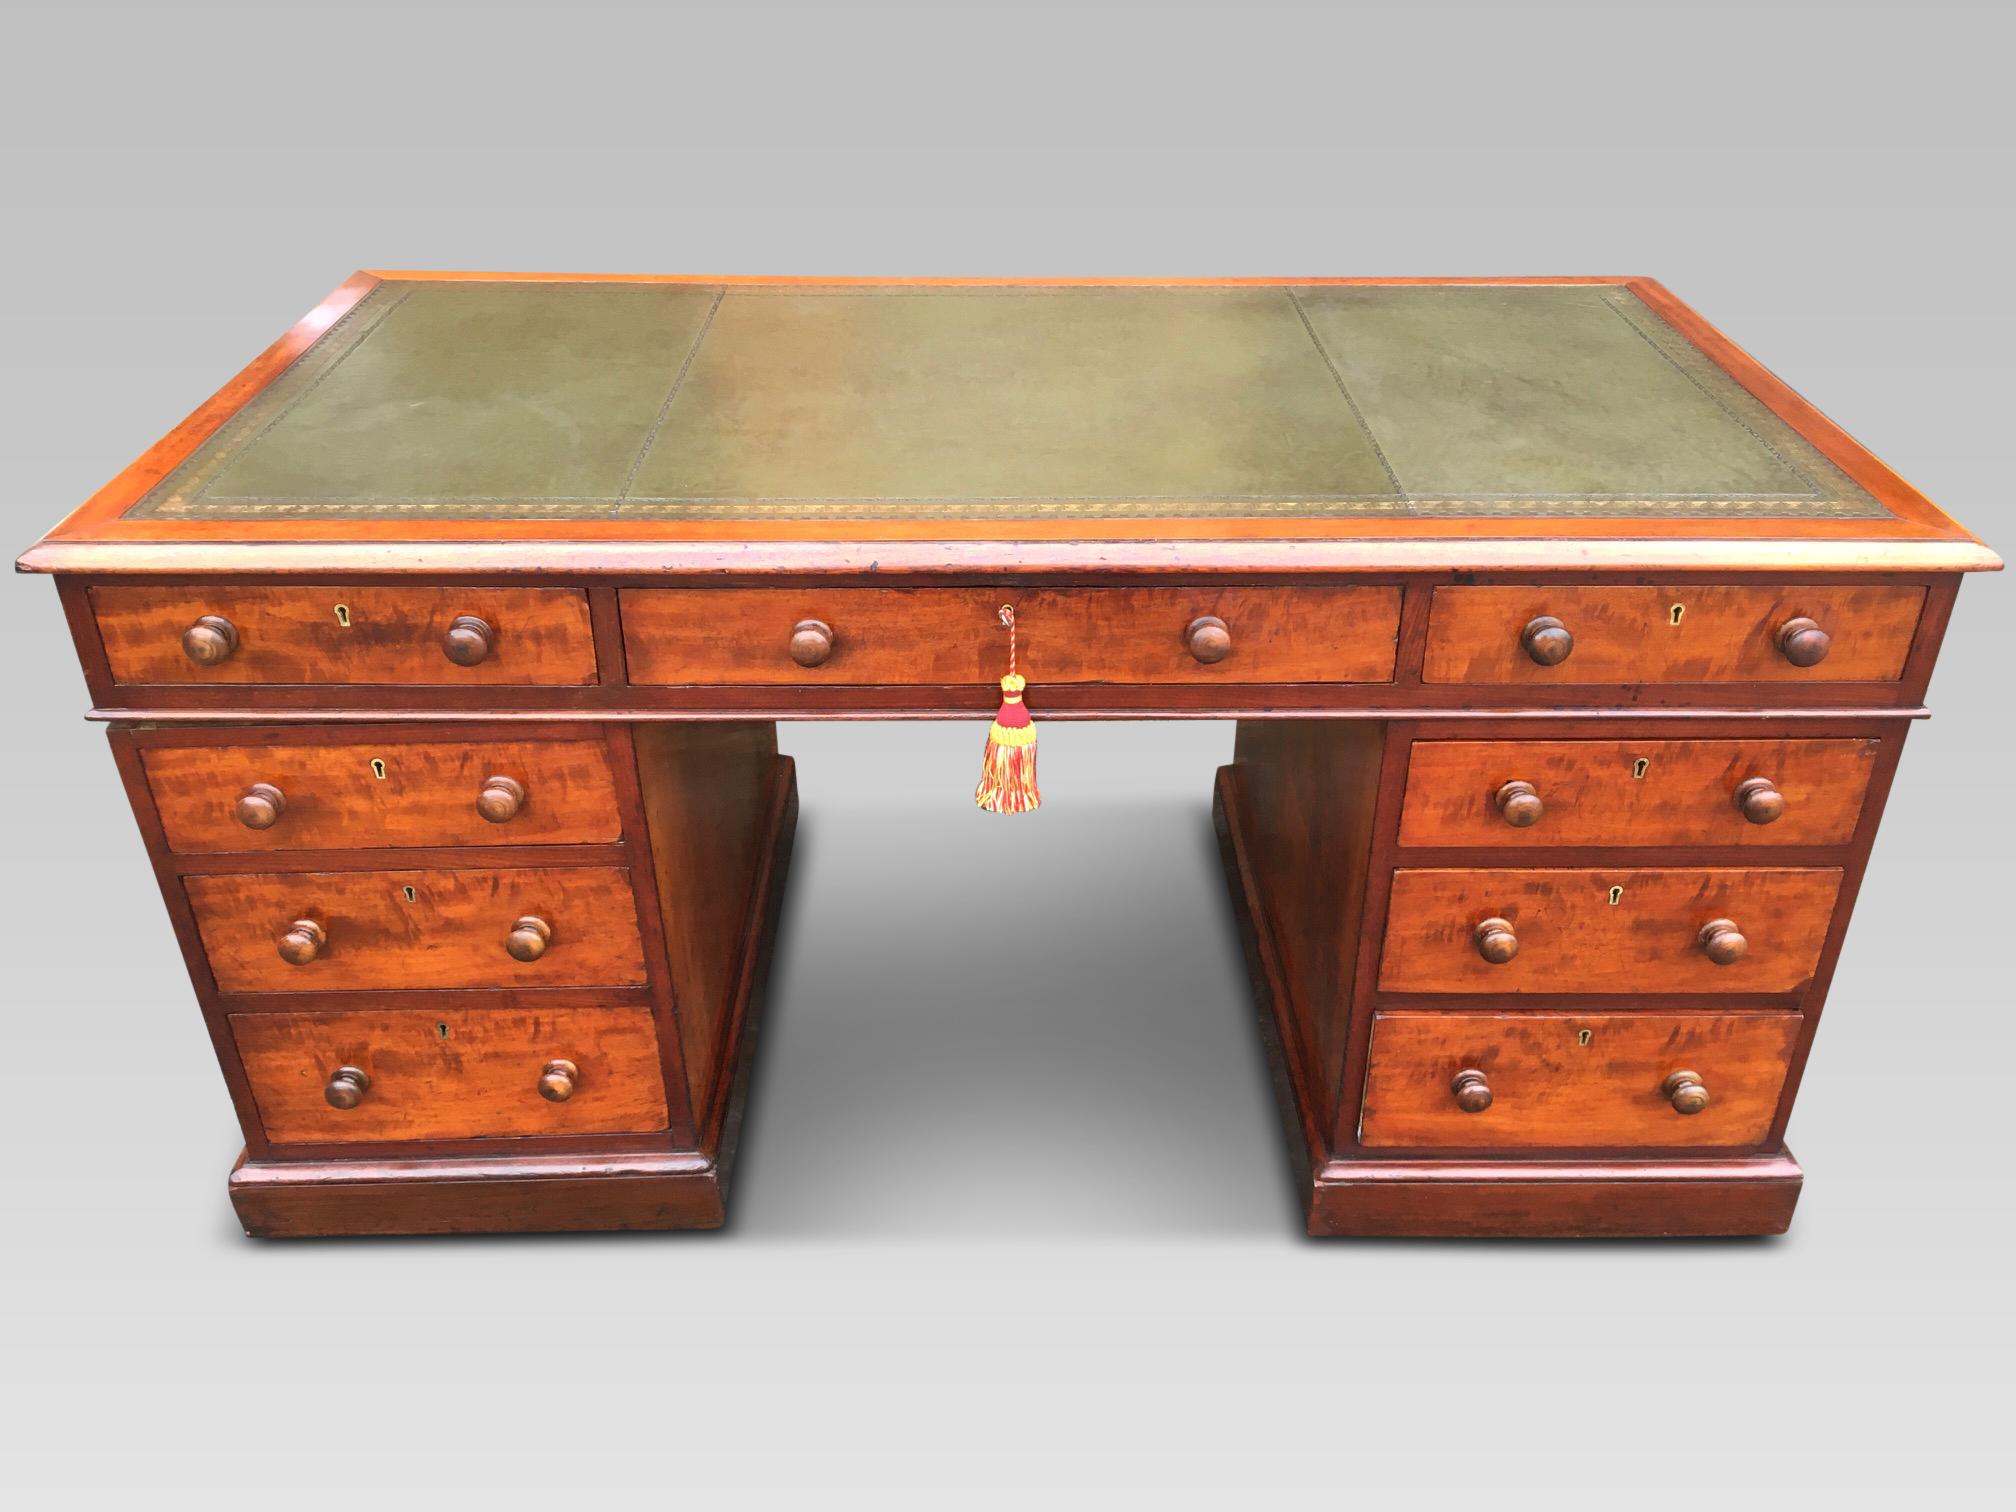 Handsome mid-19th century mahogany pedestal writing desk, English, circa 1850
This delightful desk has 9 smoothly running drawers with wooden knobs and is shown
here in excellent condition. Made during the 1850s from solid mahogany, it is seen